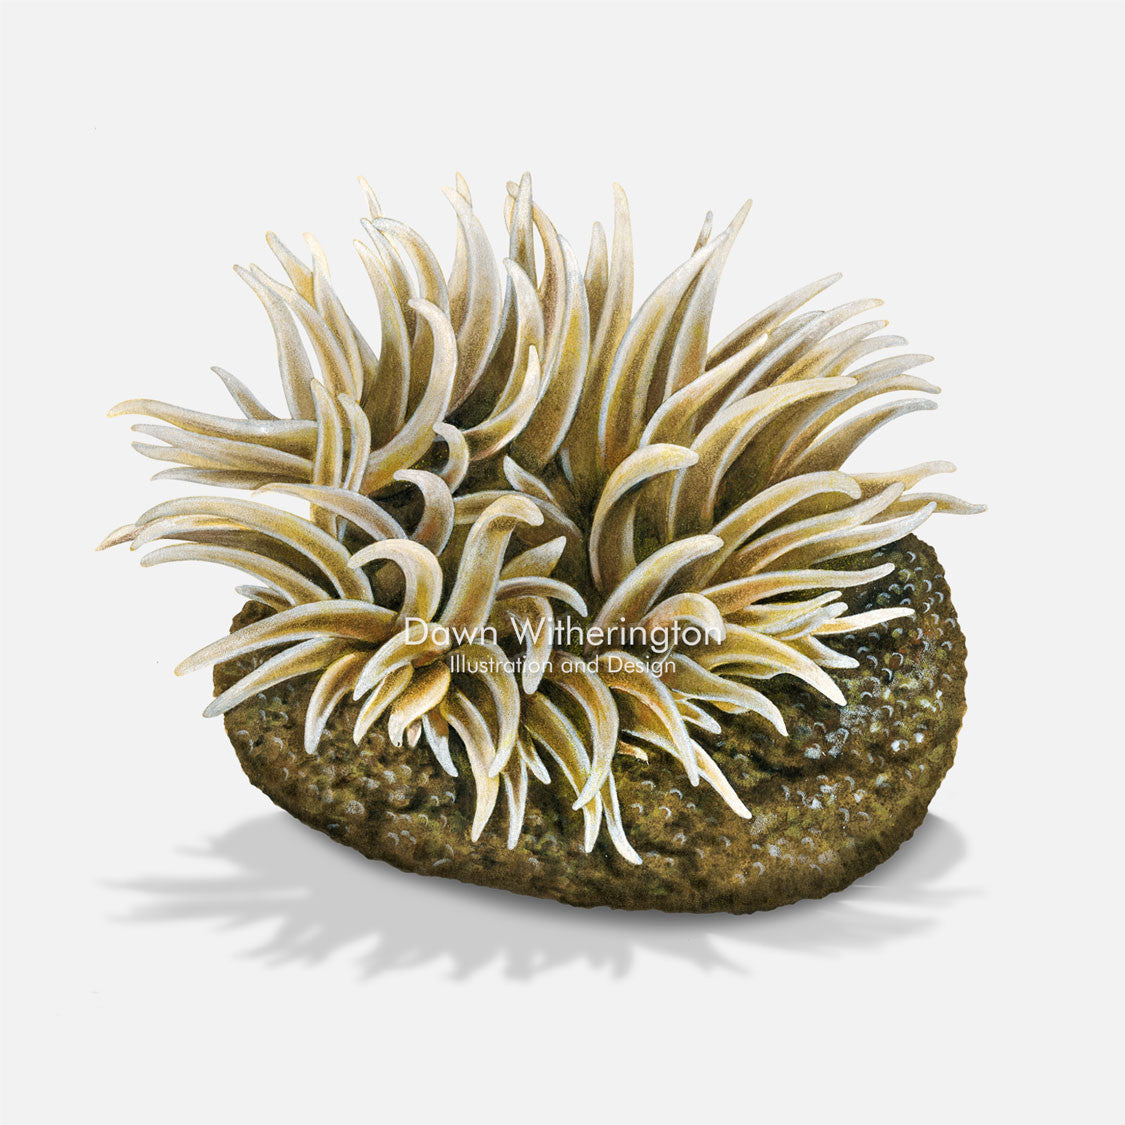 This beautiful illustration of a gray warty anemone, Anthopleura krebsi, is accurate in detail.